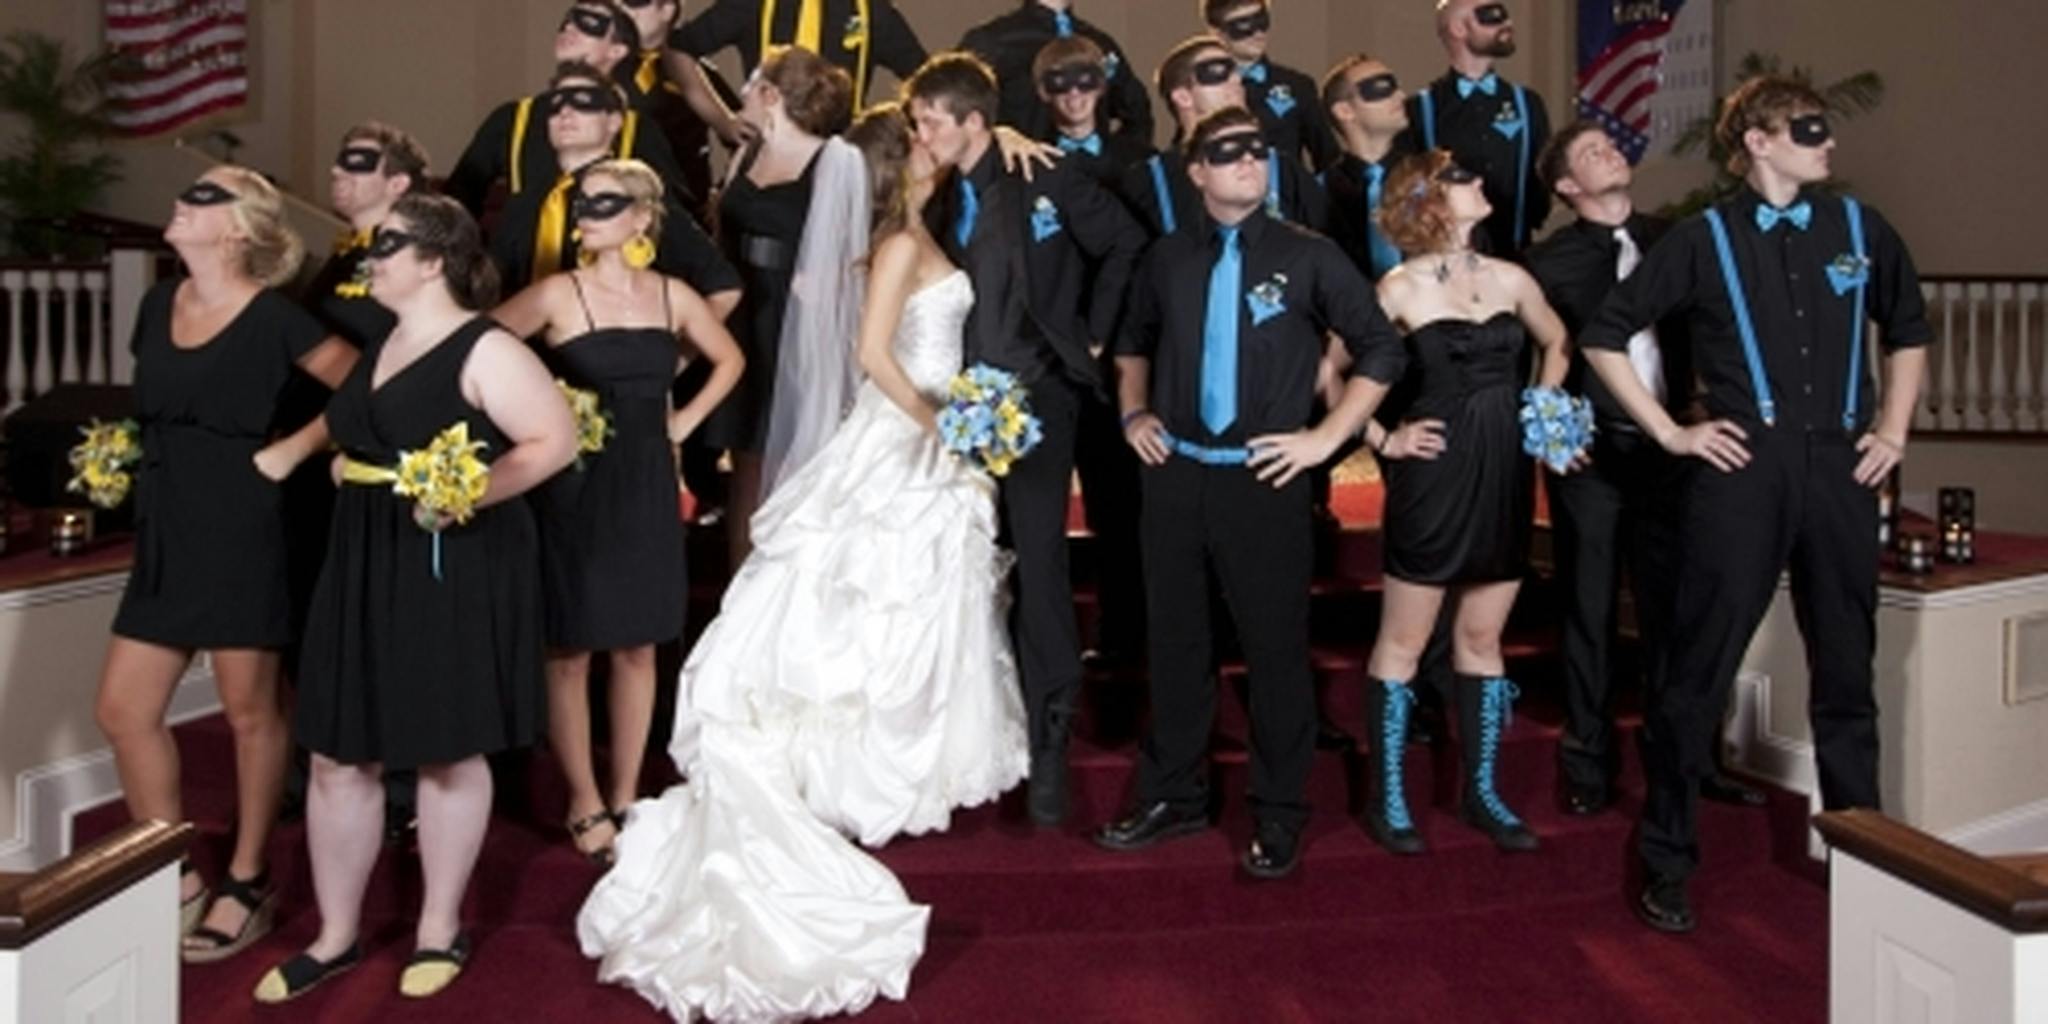 When Geeks Wed 9 Fandom Inspired Weddings You Have To See To Believe The Daily Dot